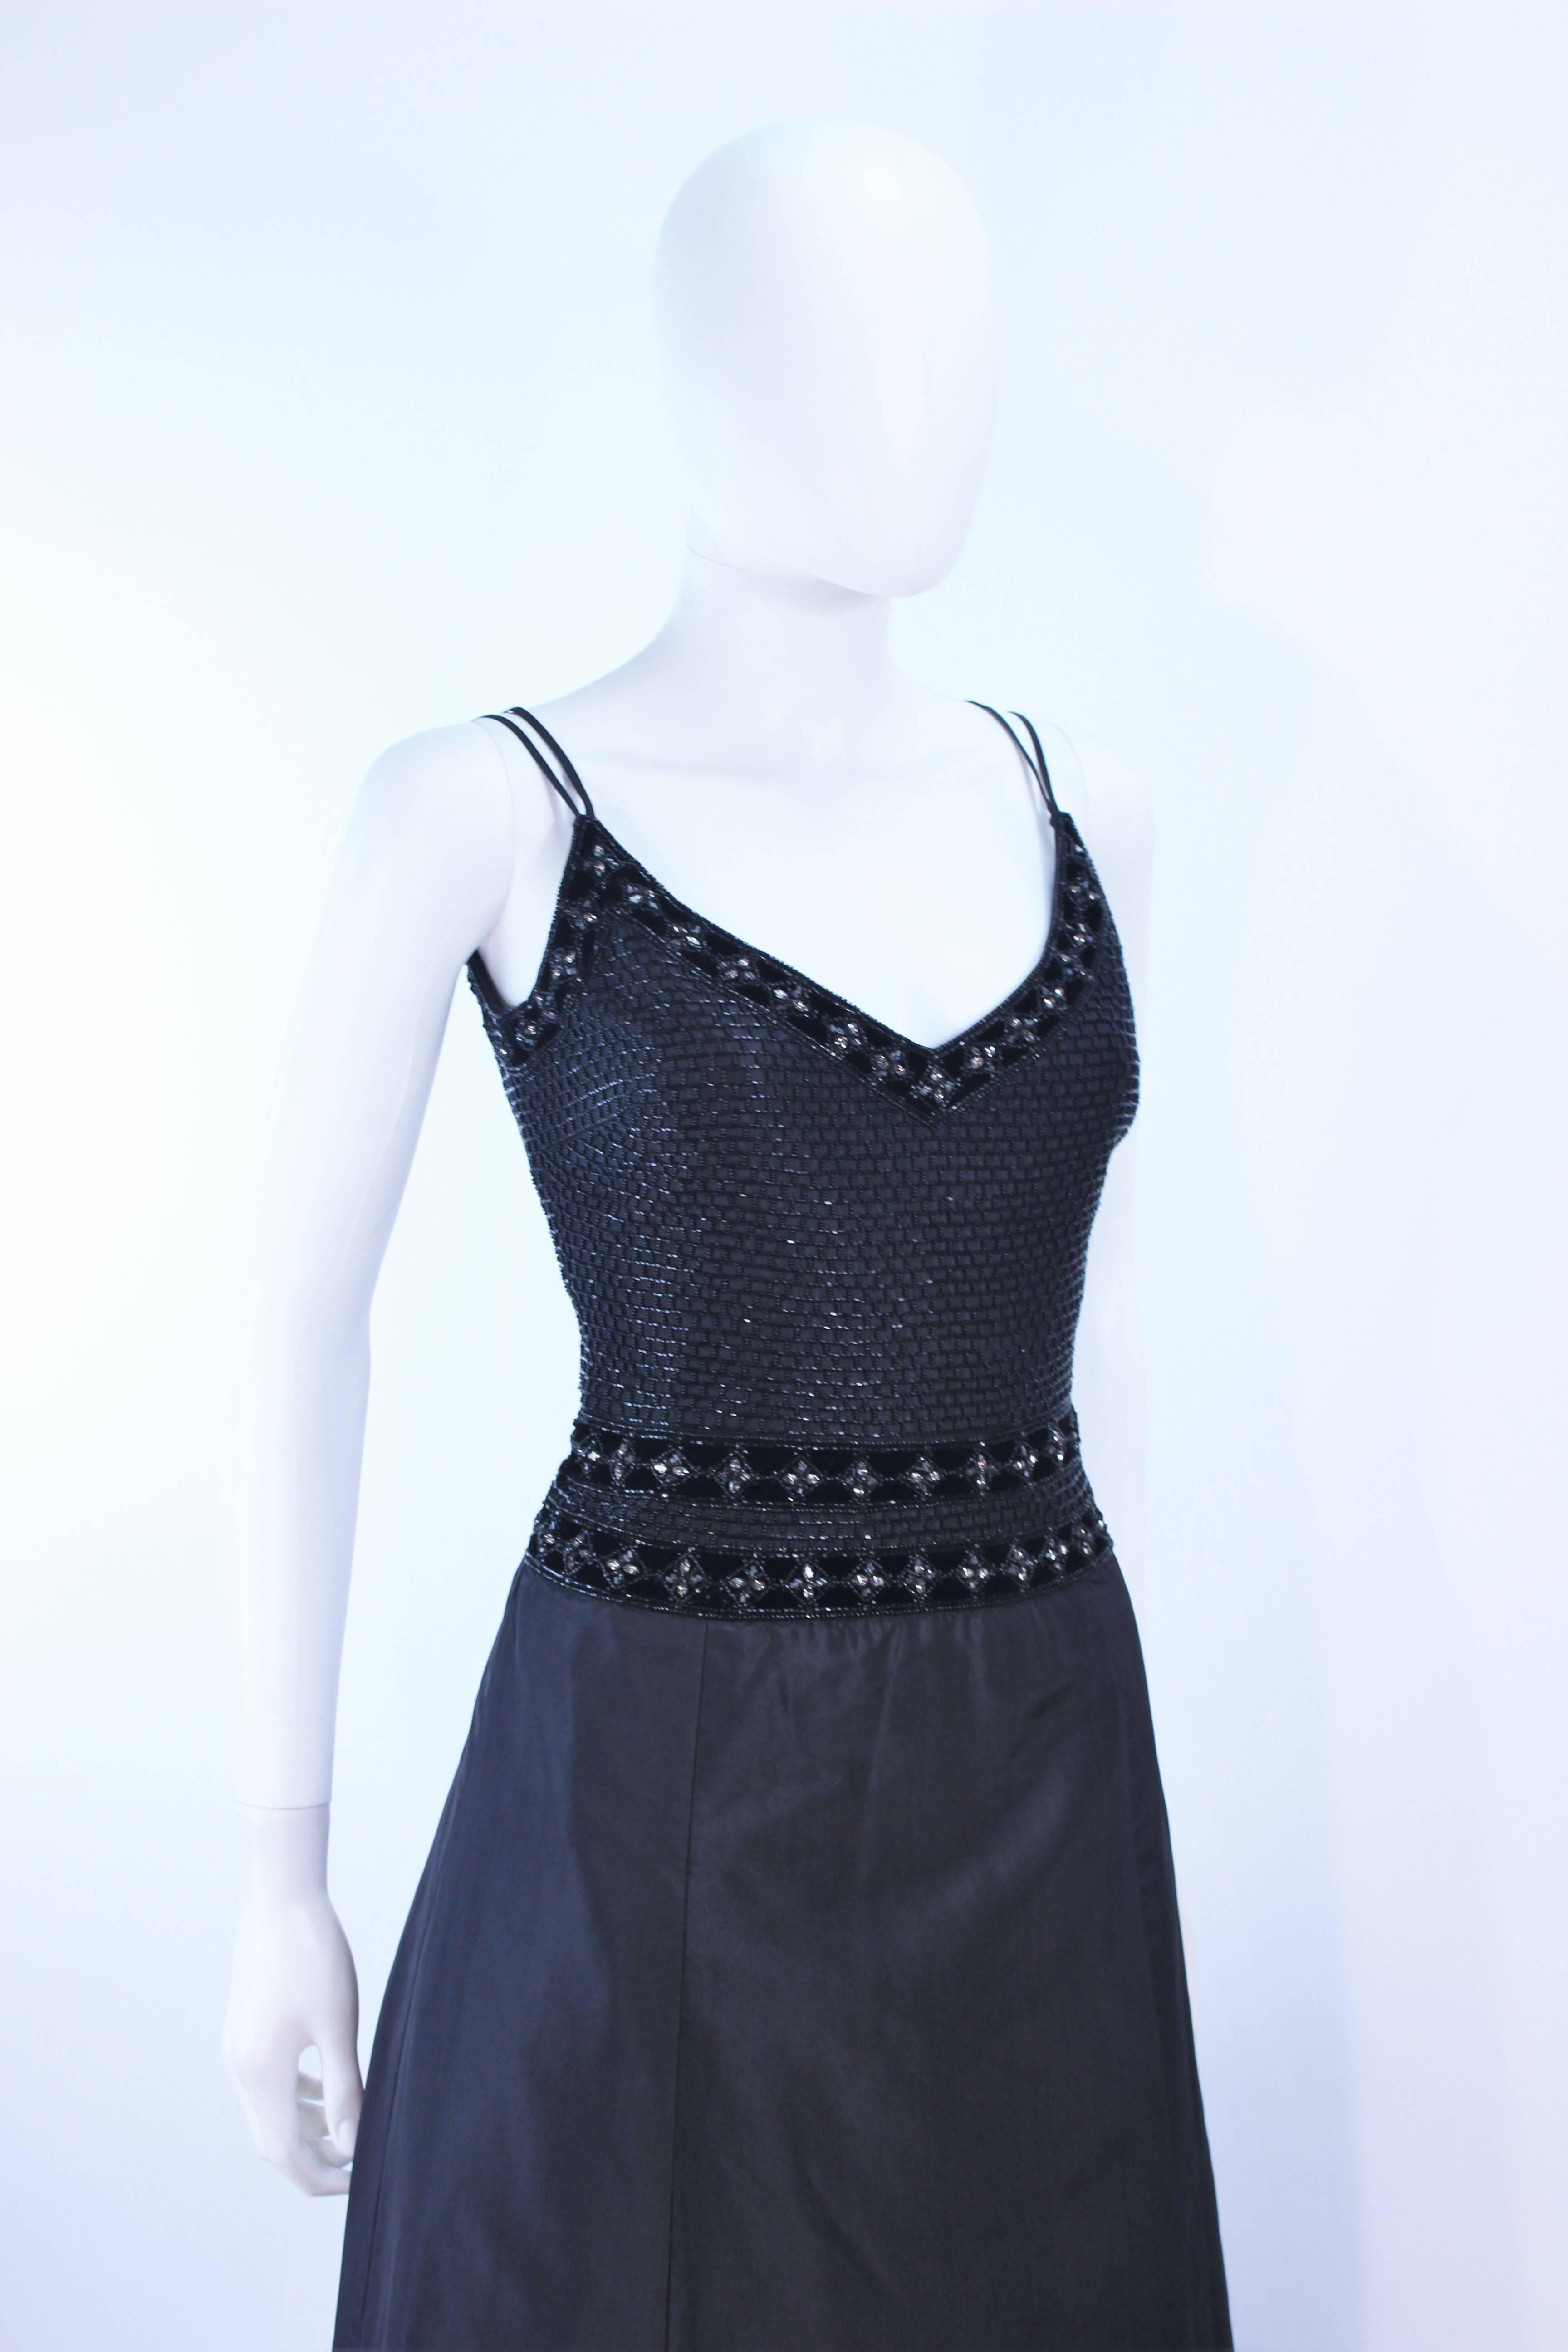 BADLEY MISCHKA Black Satin Beaded Gown with Rhinestone Accents Size 4  In Excellent Condition For Sale In Los Angeles, CA